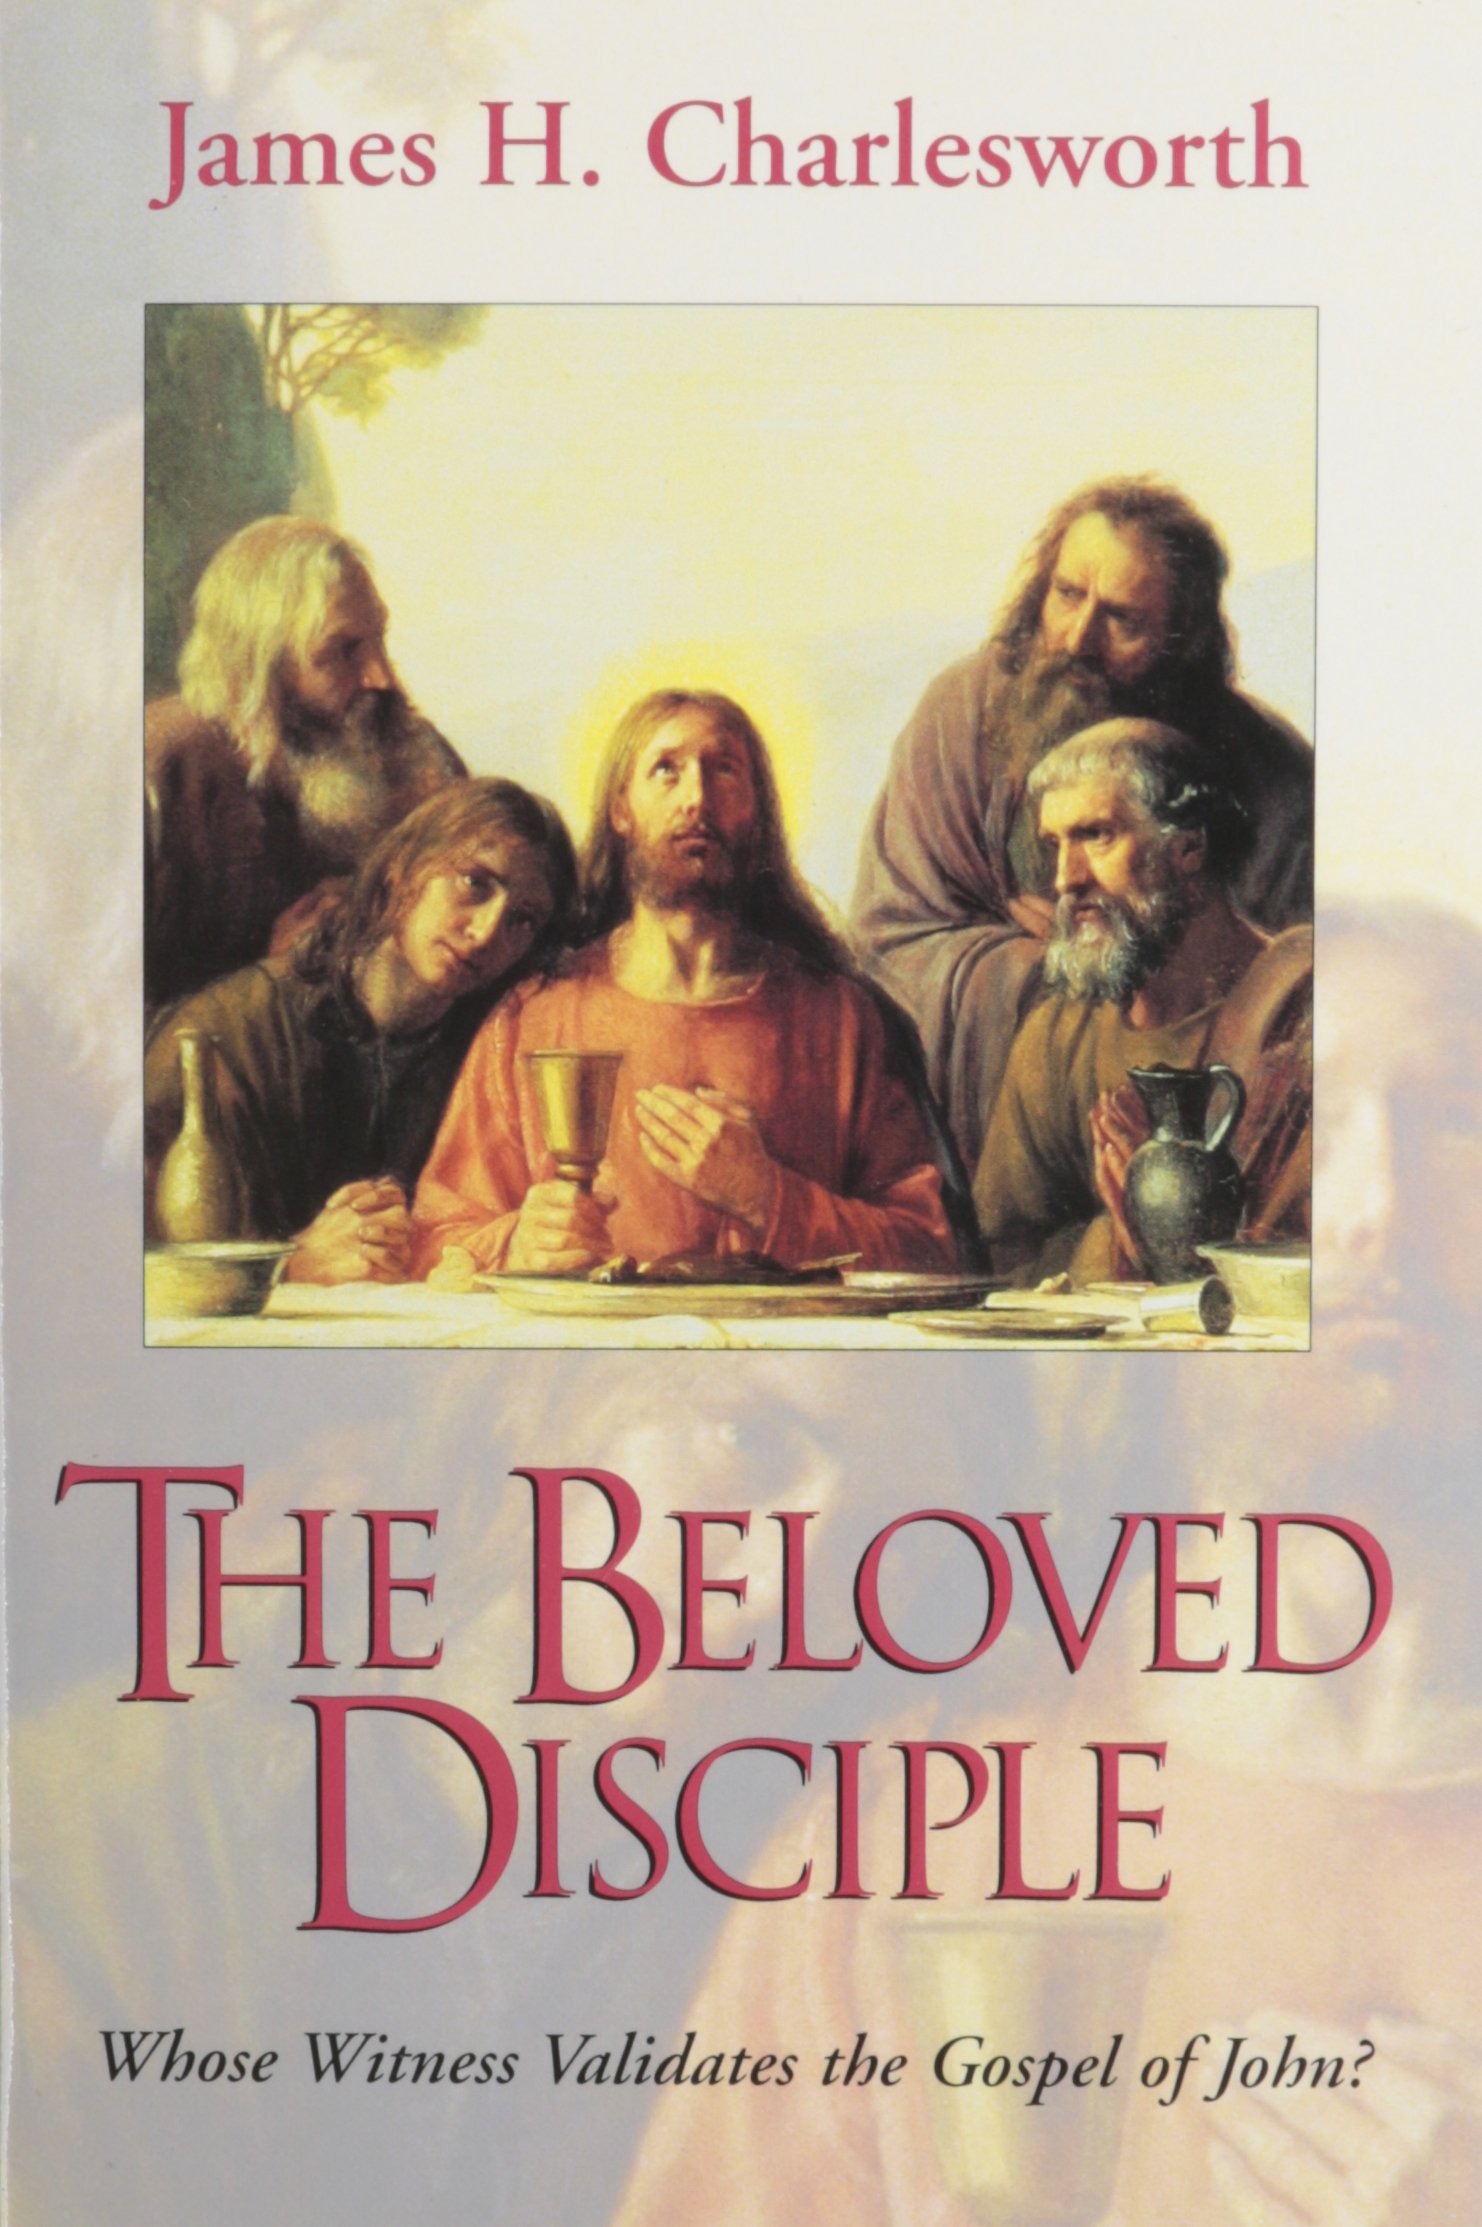 The Beloved Disciple: Whose Witness Validates the Gospel of John?